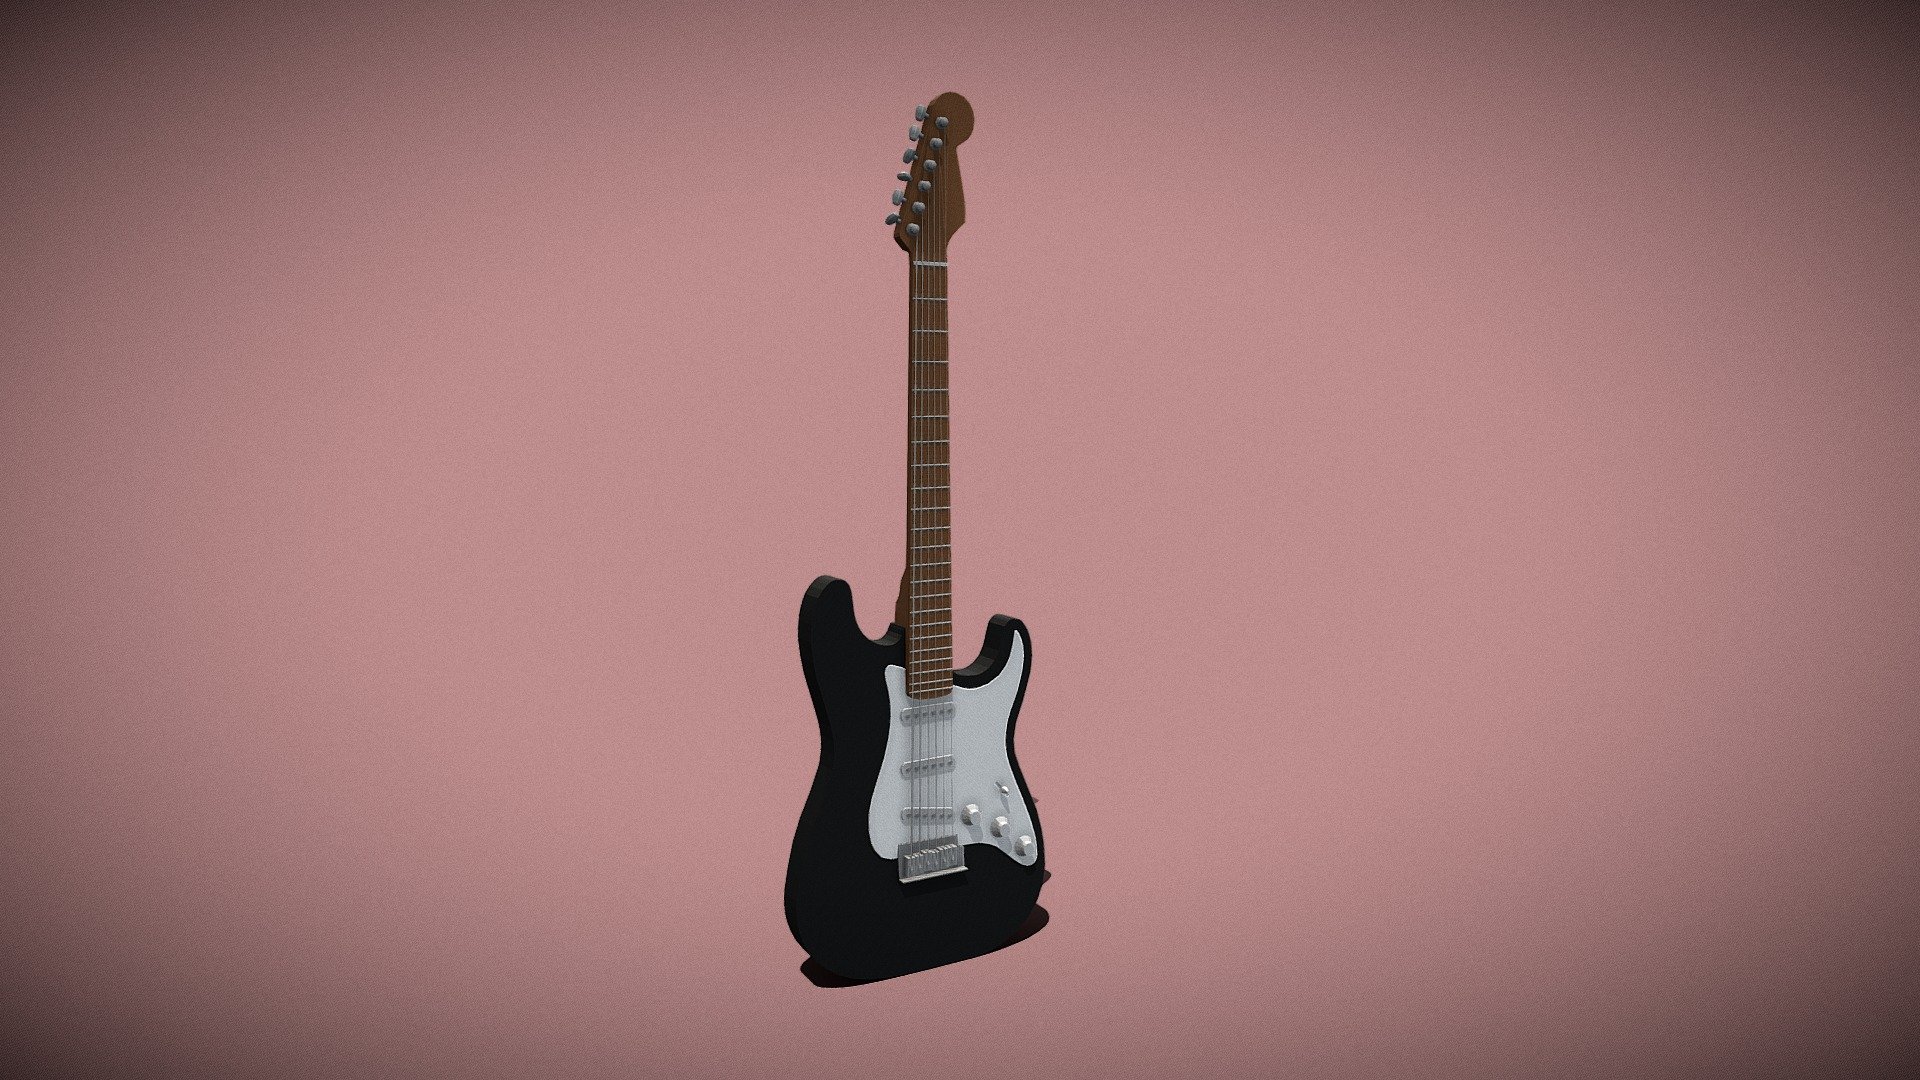 Low poly Stratocaster guitar